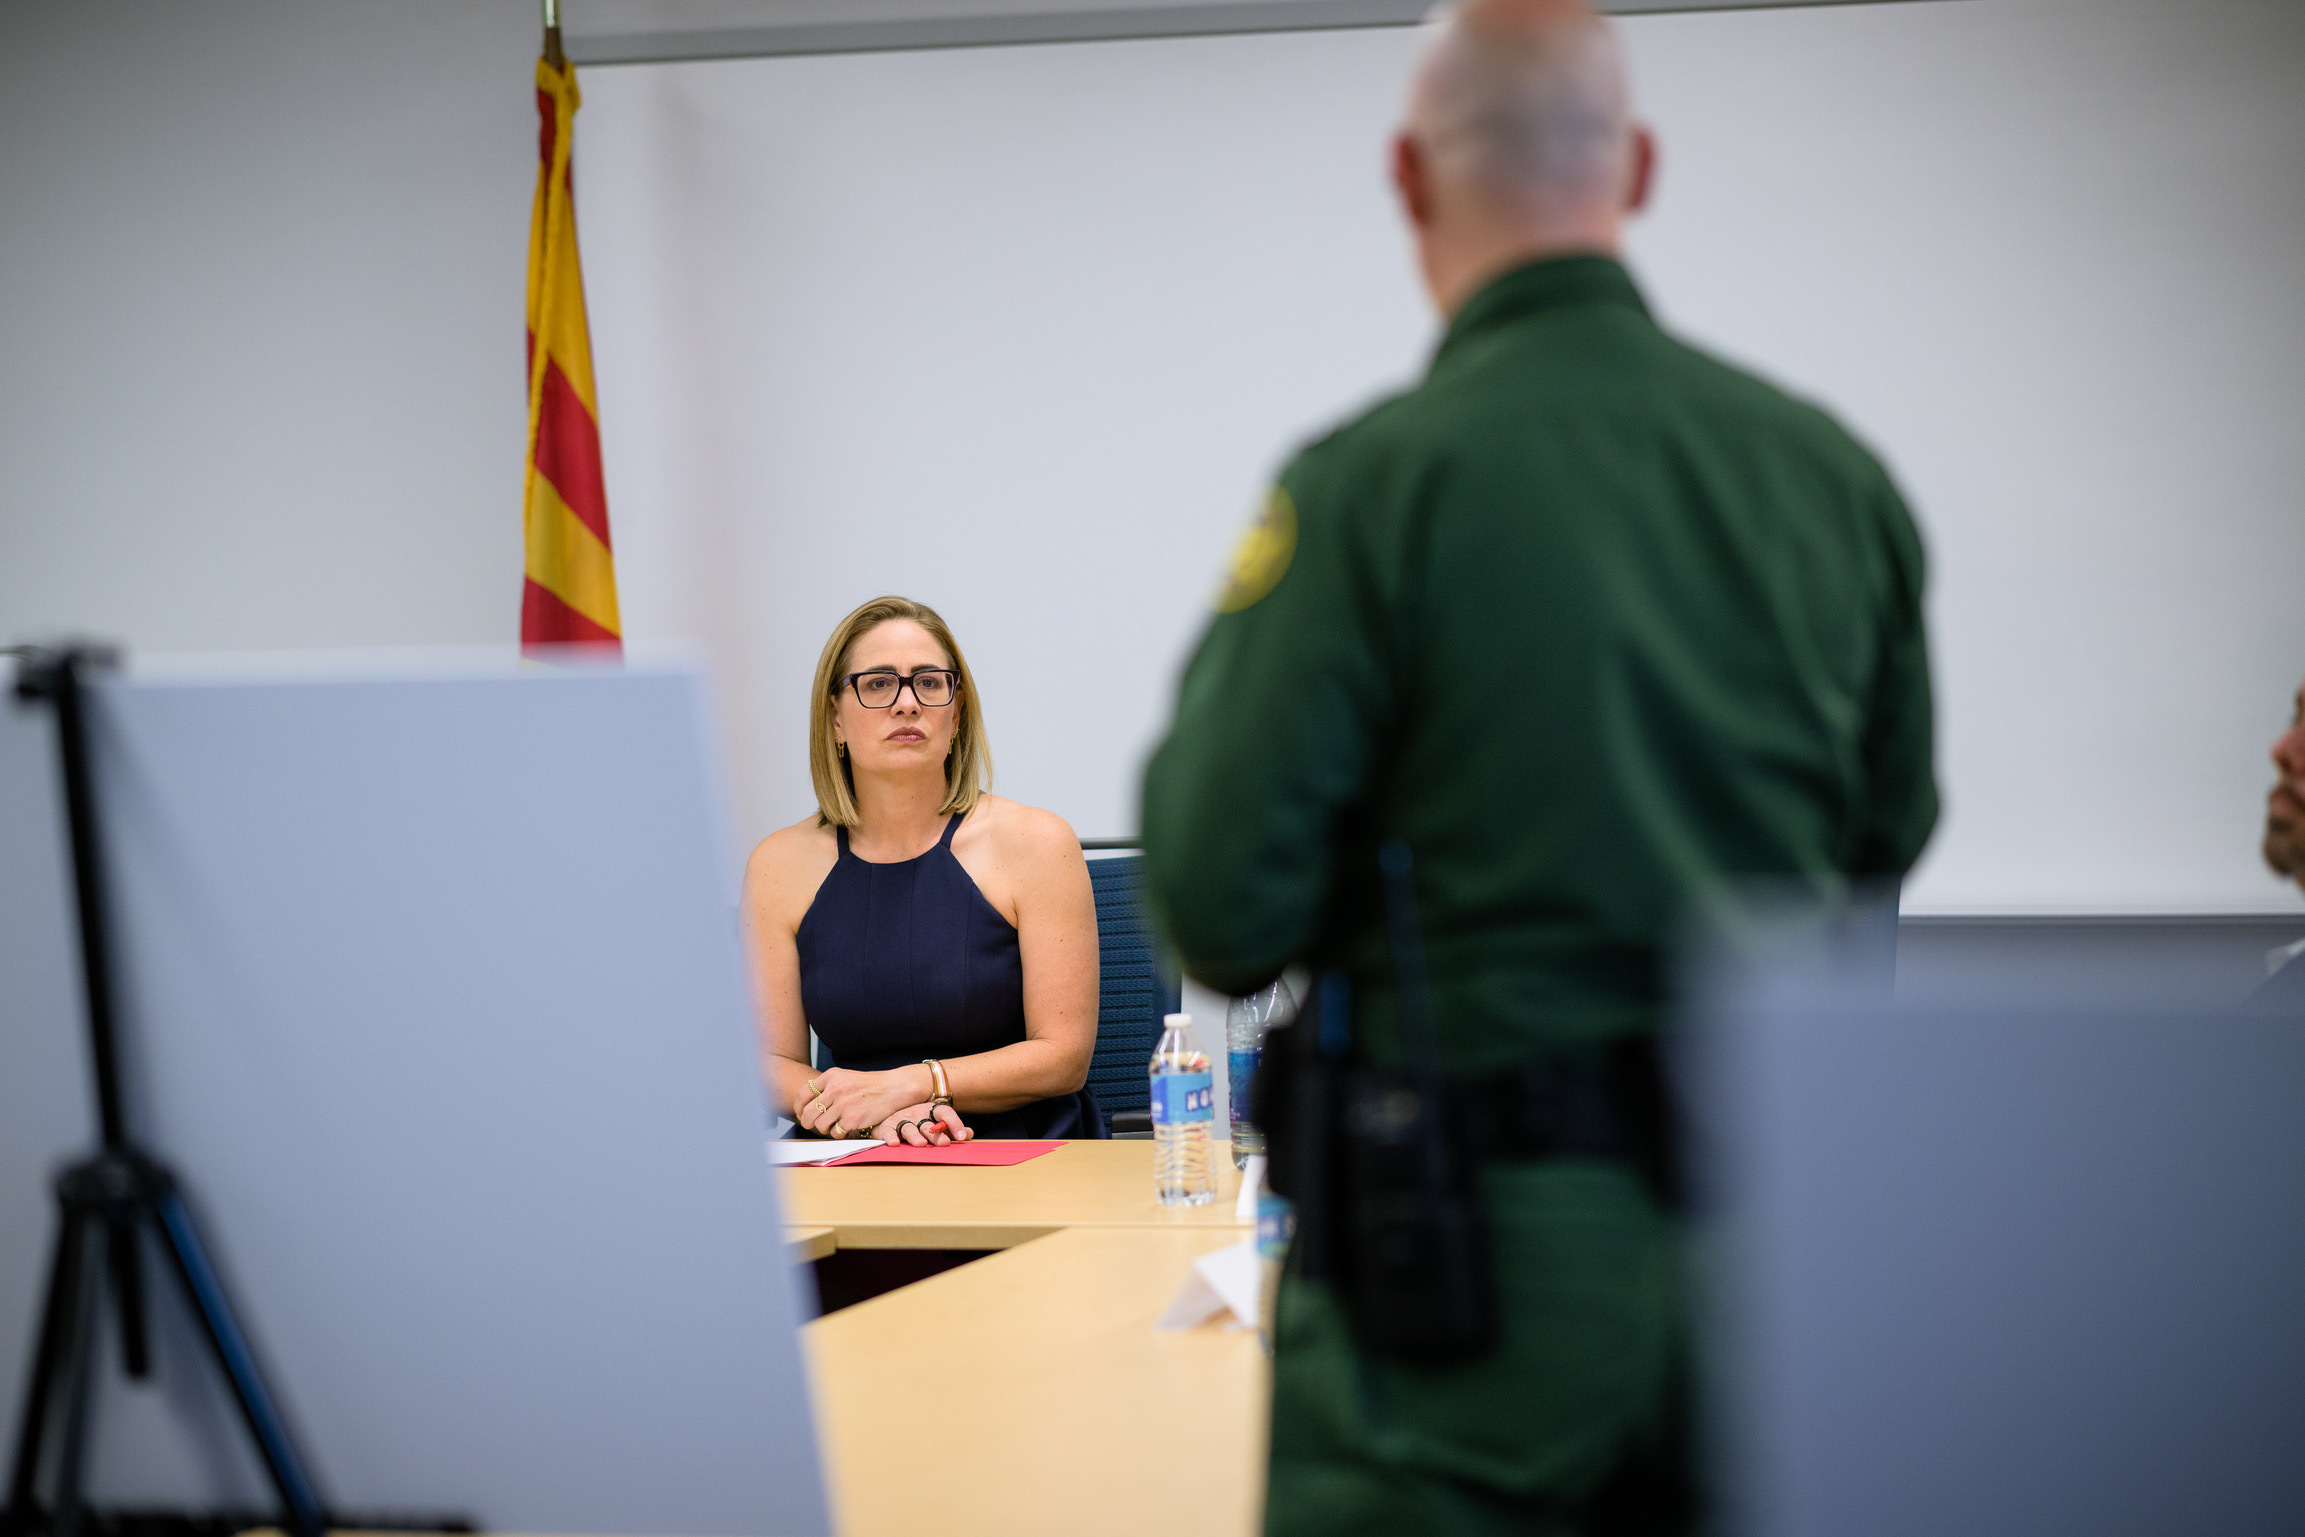 Sinema Hears from Arizona Local Community Leaders on Challenges Following Title 42 Termination